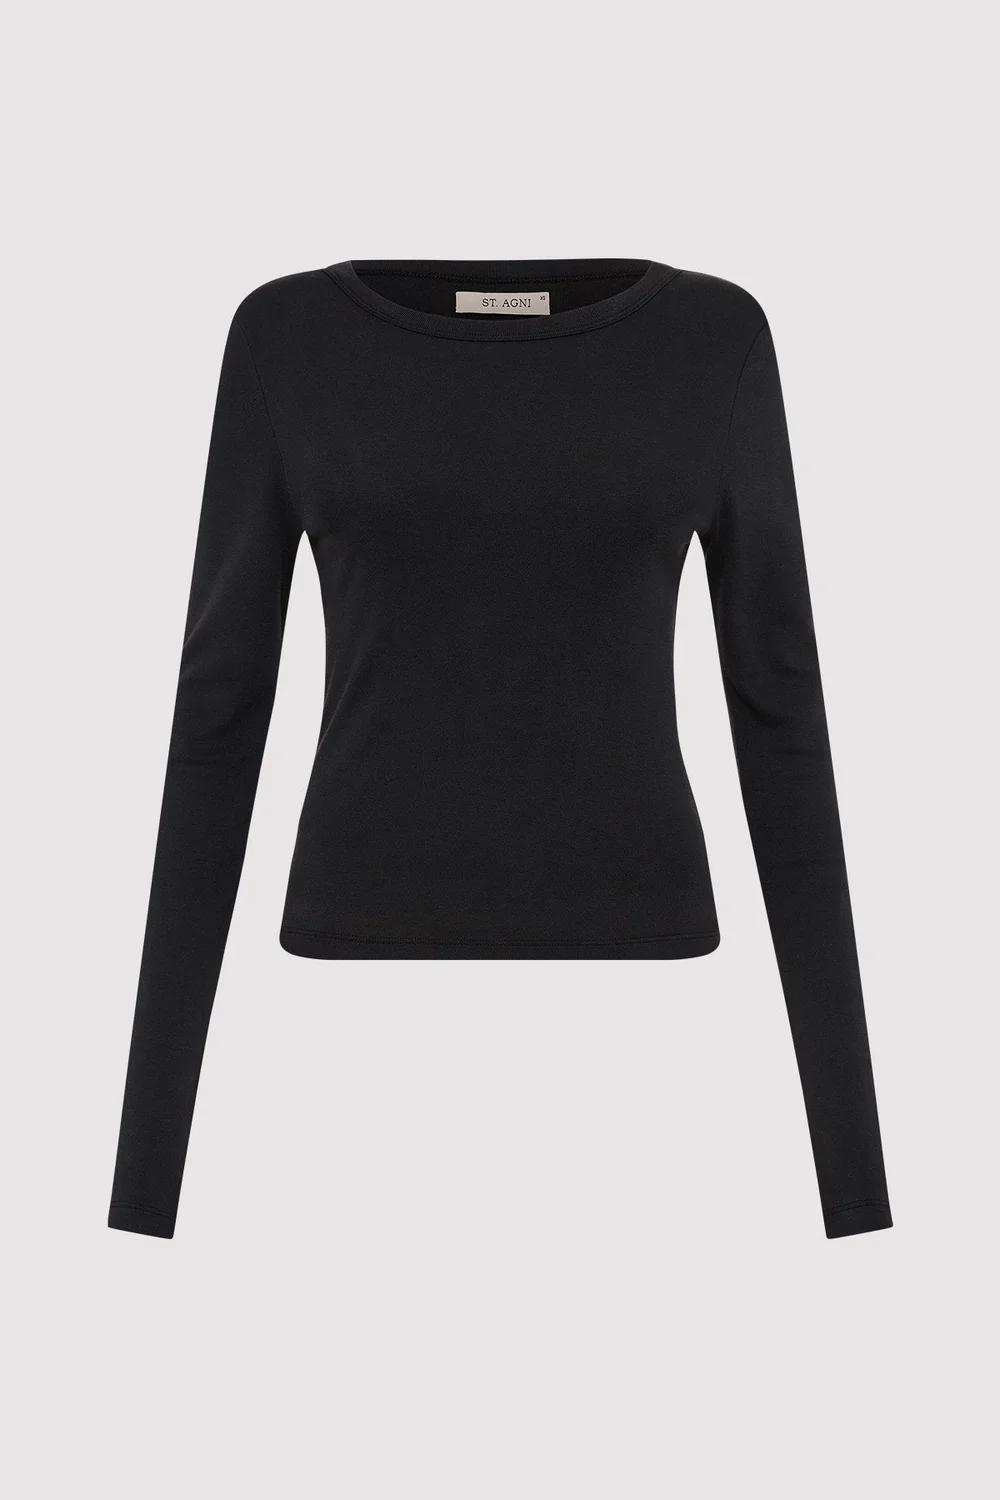 Product Image for Organic Cotton Long Sleeve Top, Black